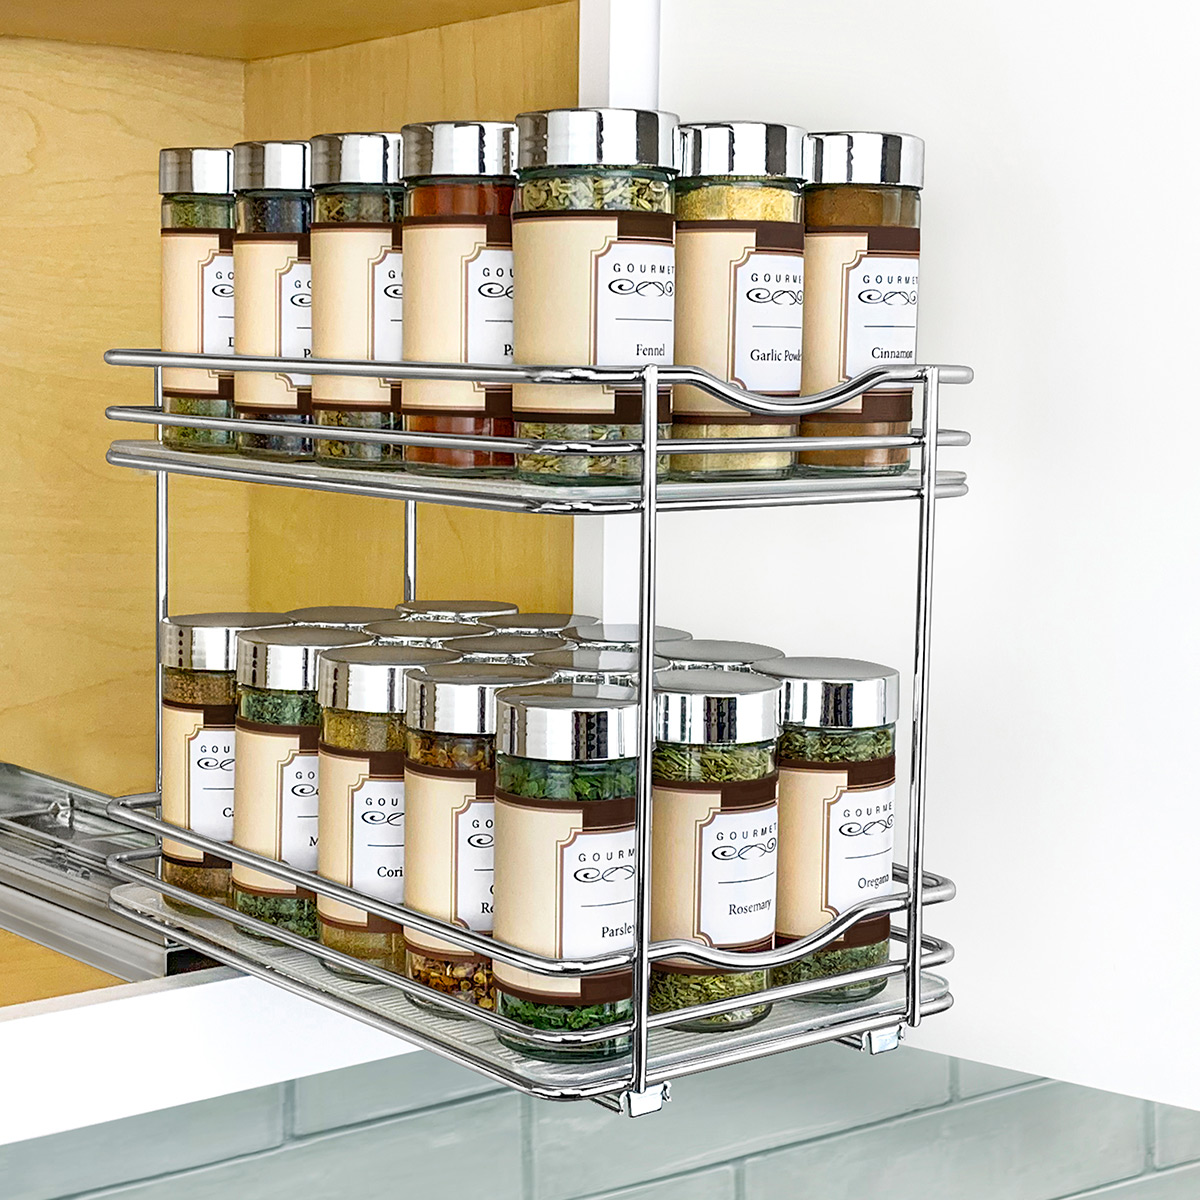 Lynk Professional Double Spice Racks | The Container Store